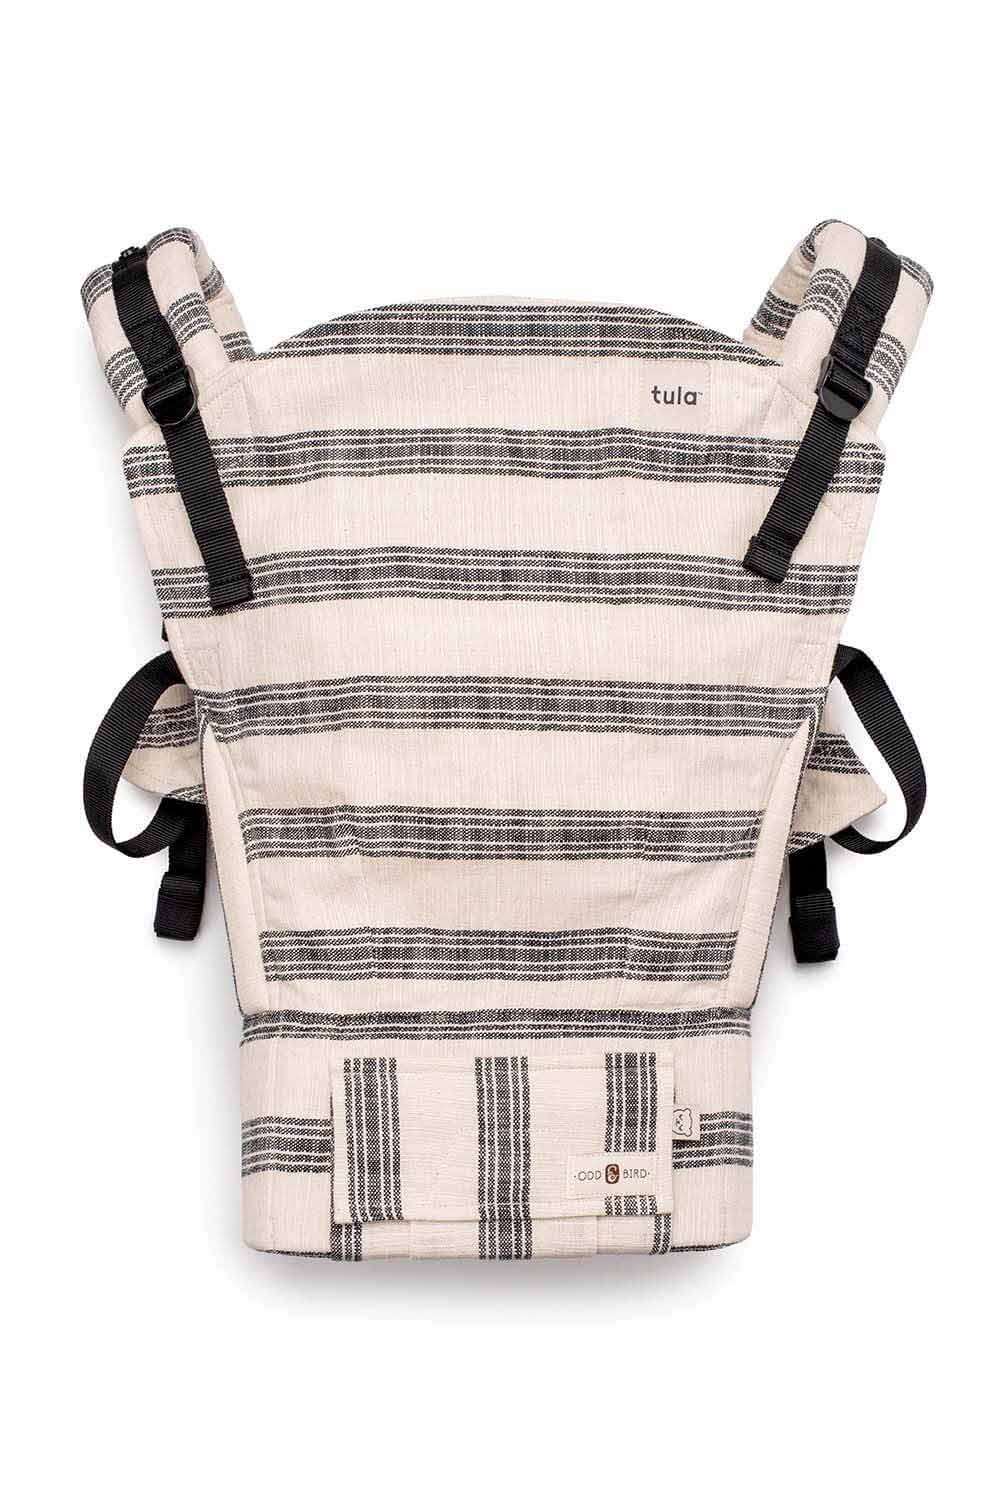 Sultan - Signature Woven Standard Baby Carrier